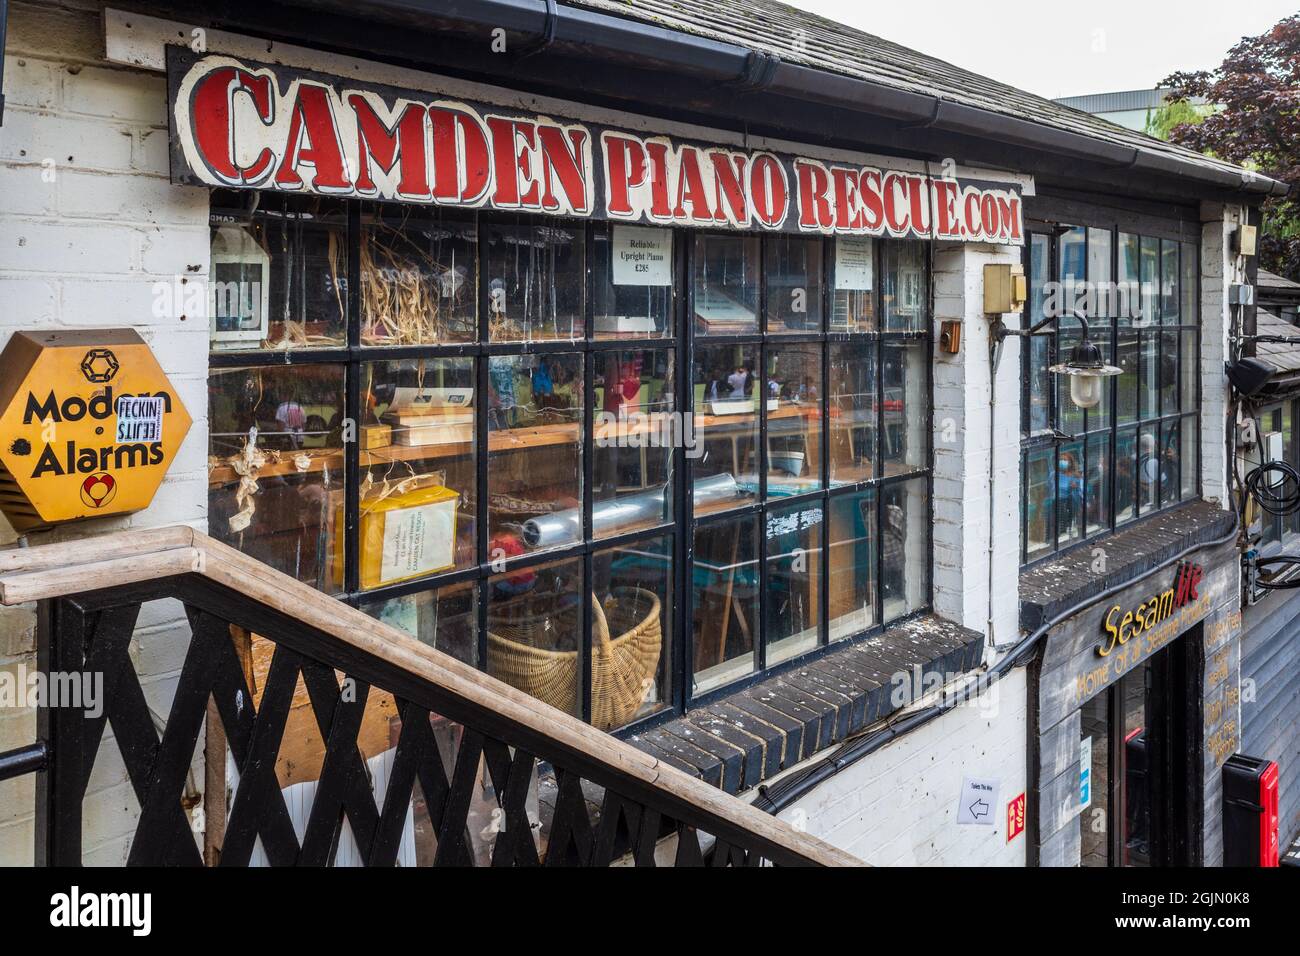 Camden Piano Rescue premises at Camden Lock, Camden, London. Founded by Desmond Gentle. Stock Photo